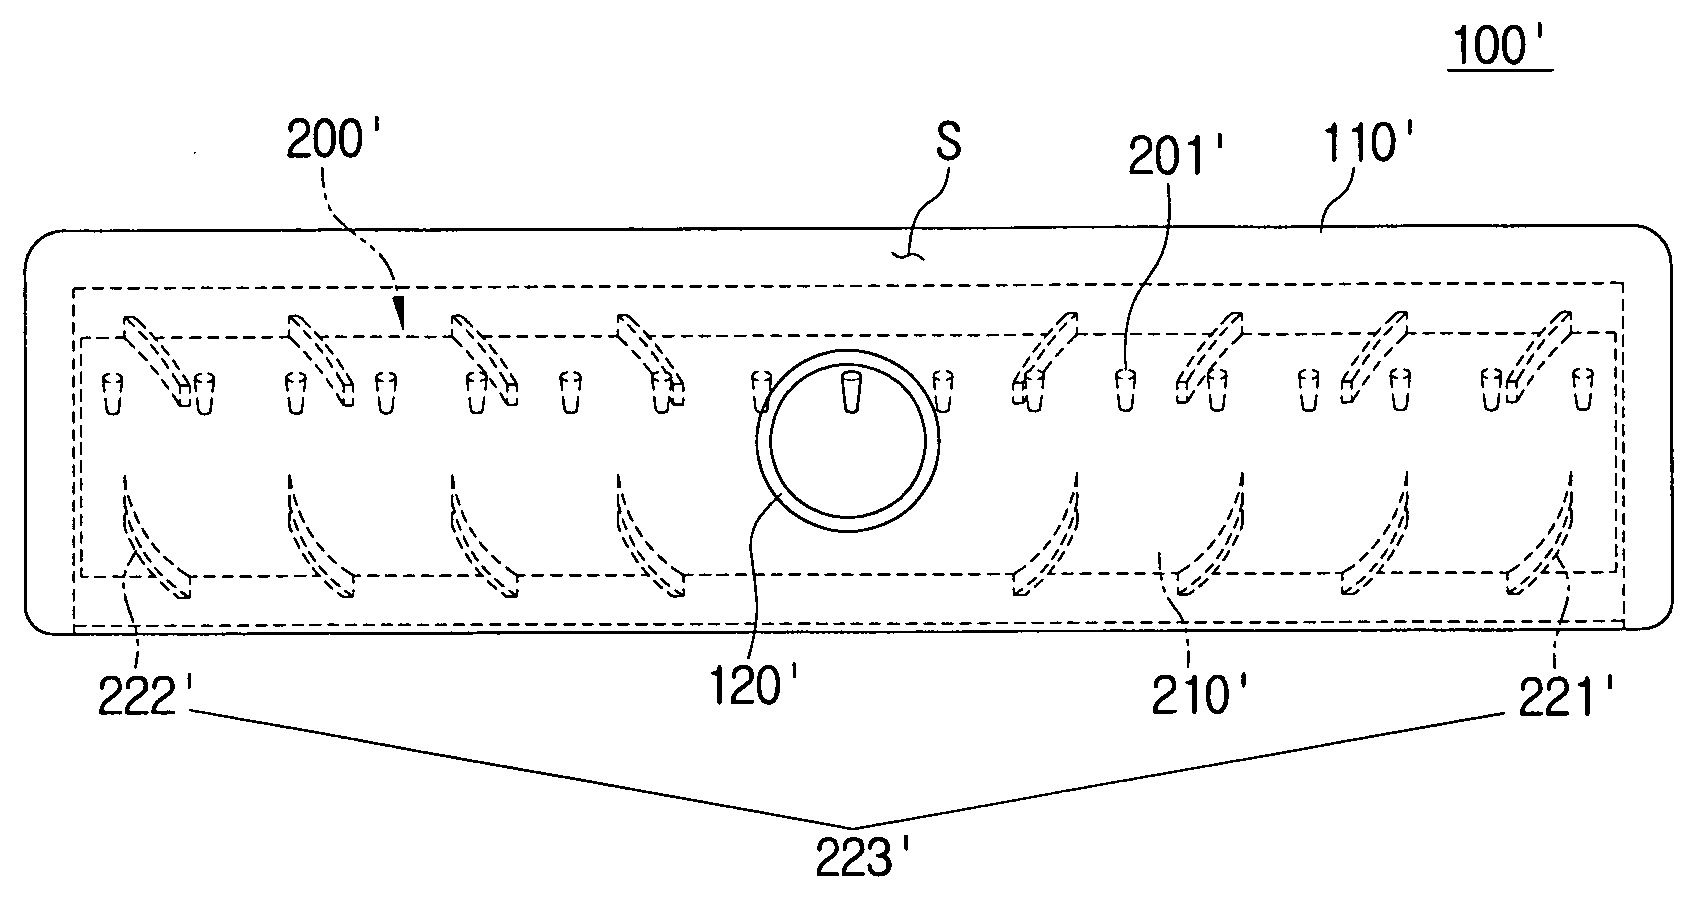 Agitator and suction nozzle for vacuum cleaner having the same